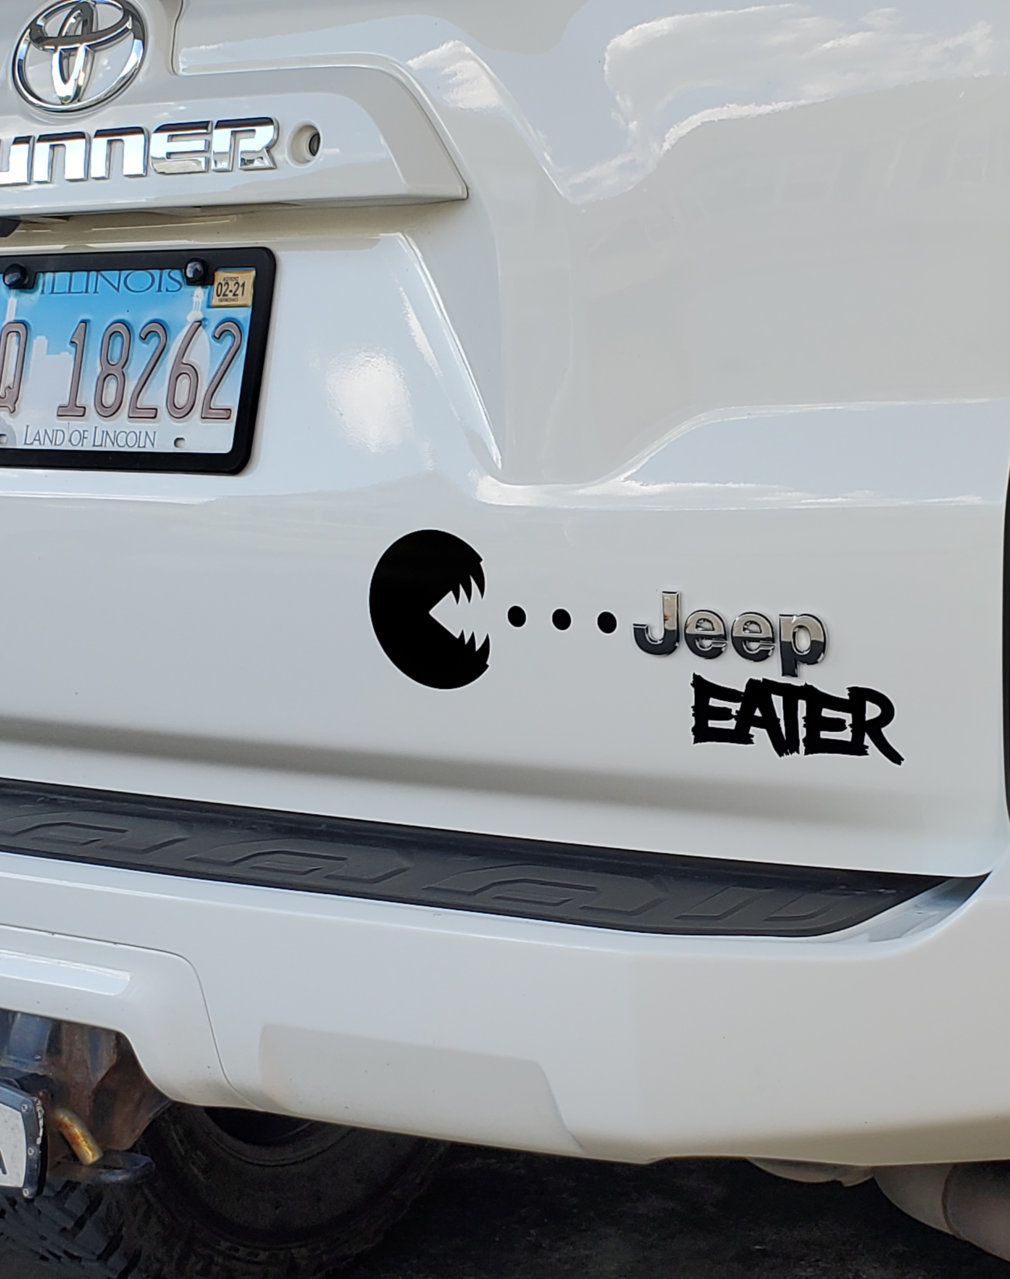 2020 JeepEater Pic.jpg